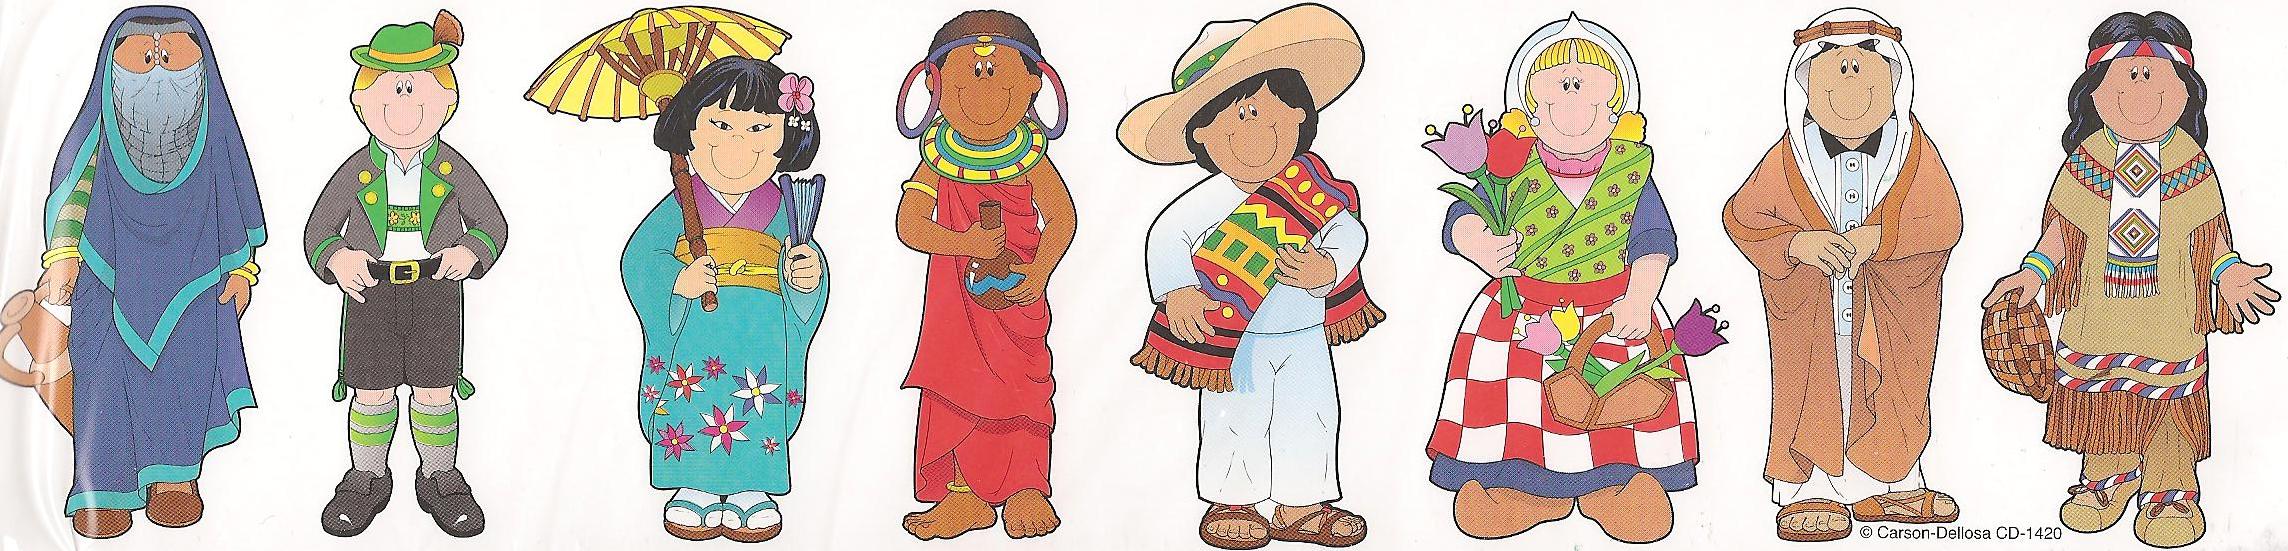 Free Printable Childrens Multicultural Books   Bresaniel  Consulting